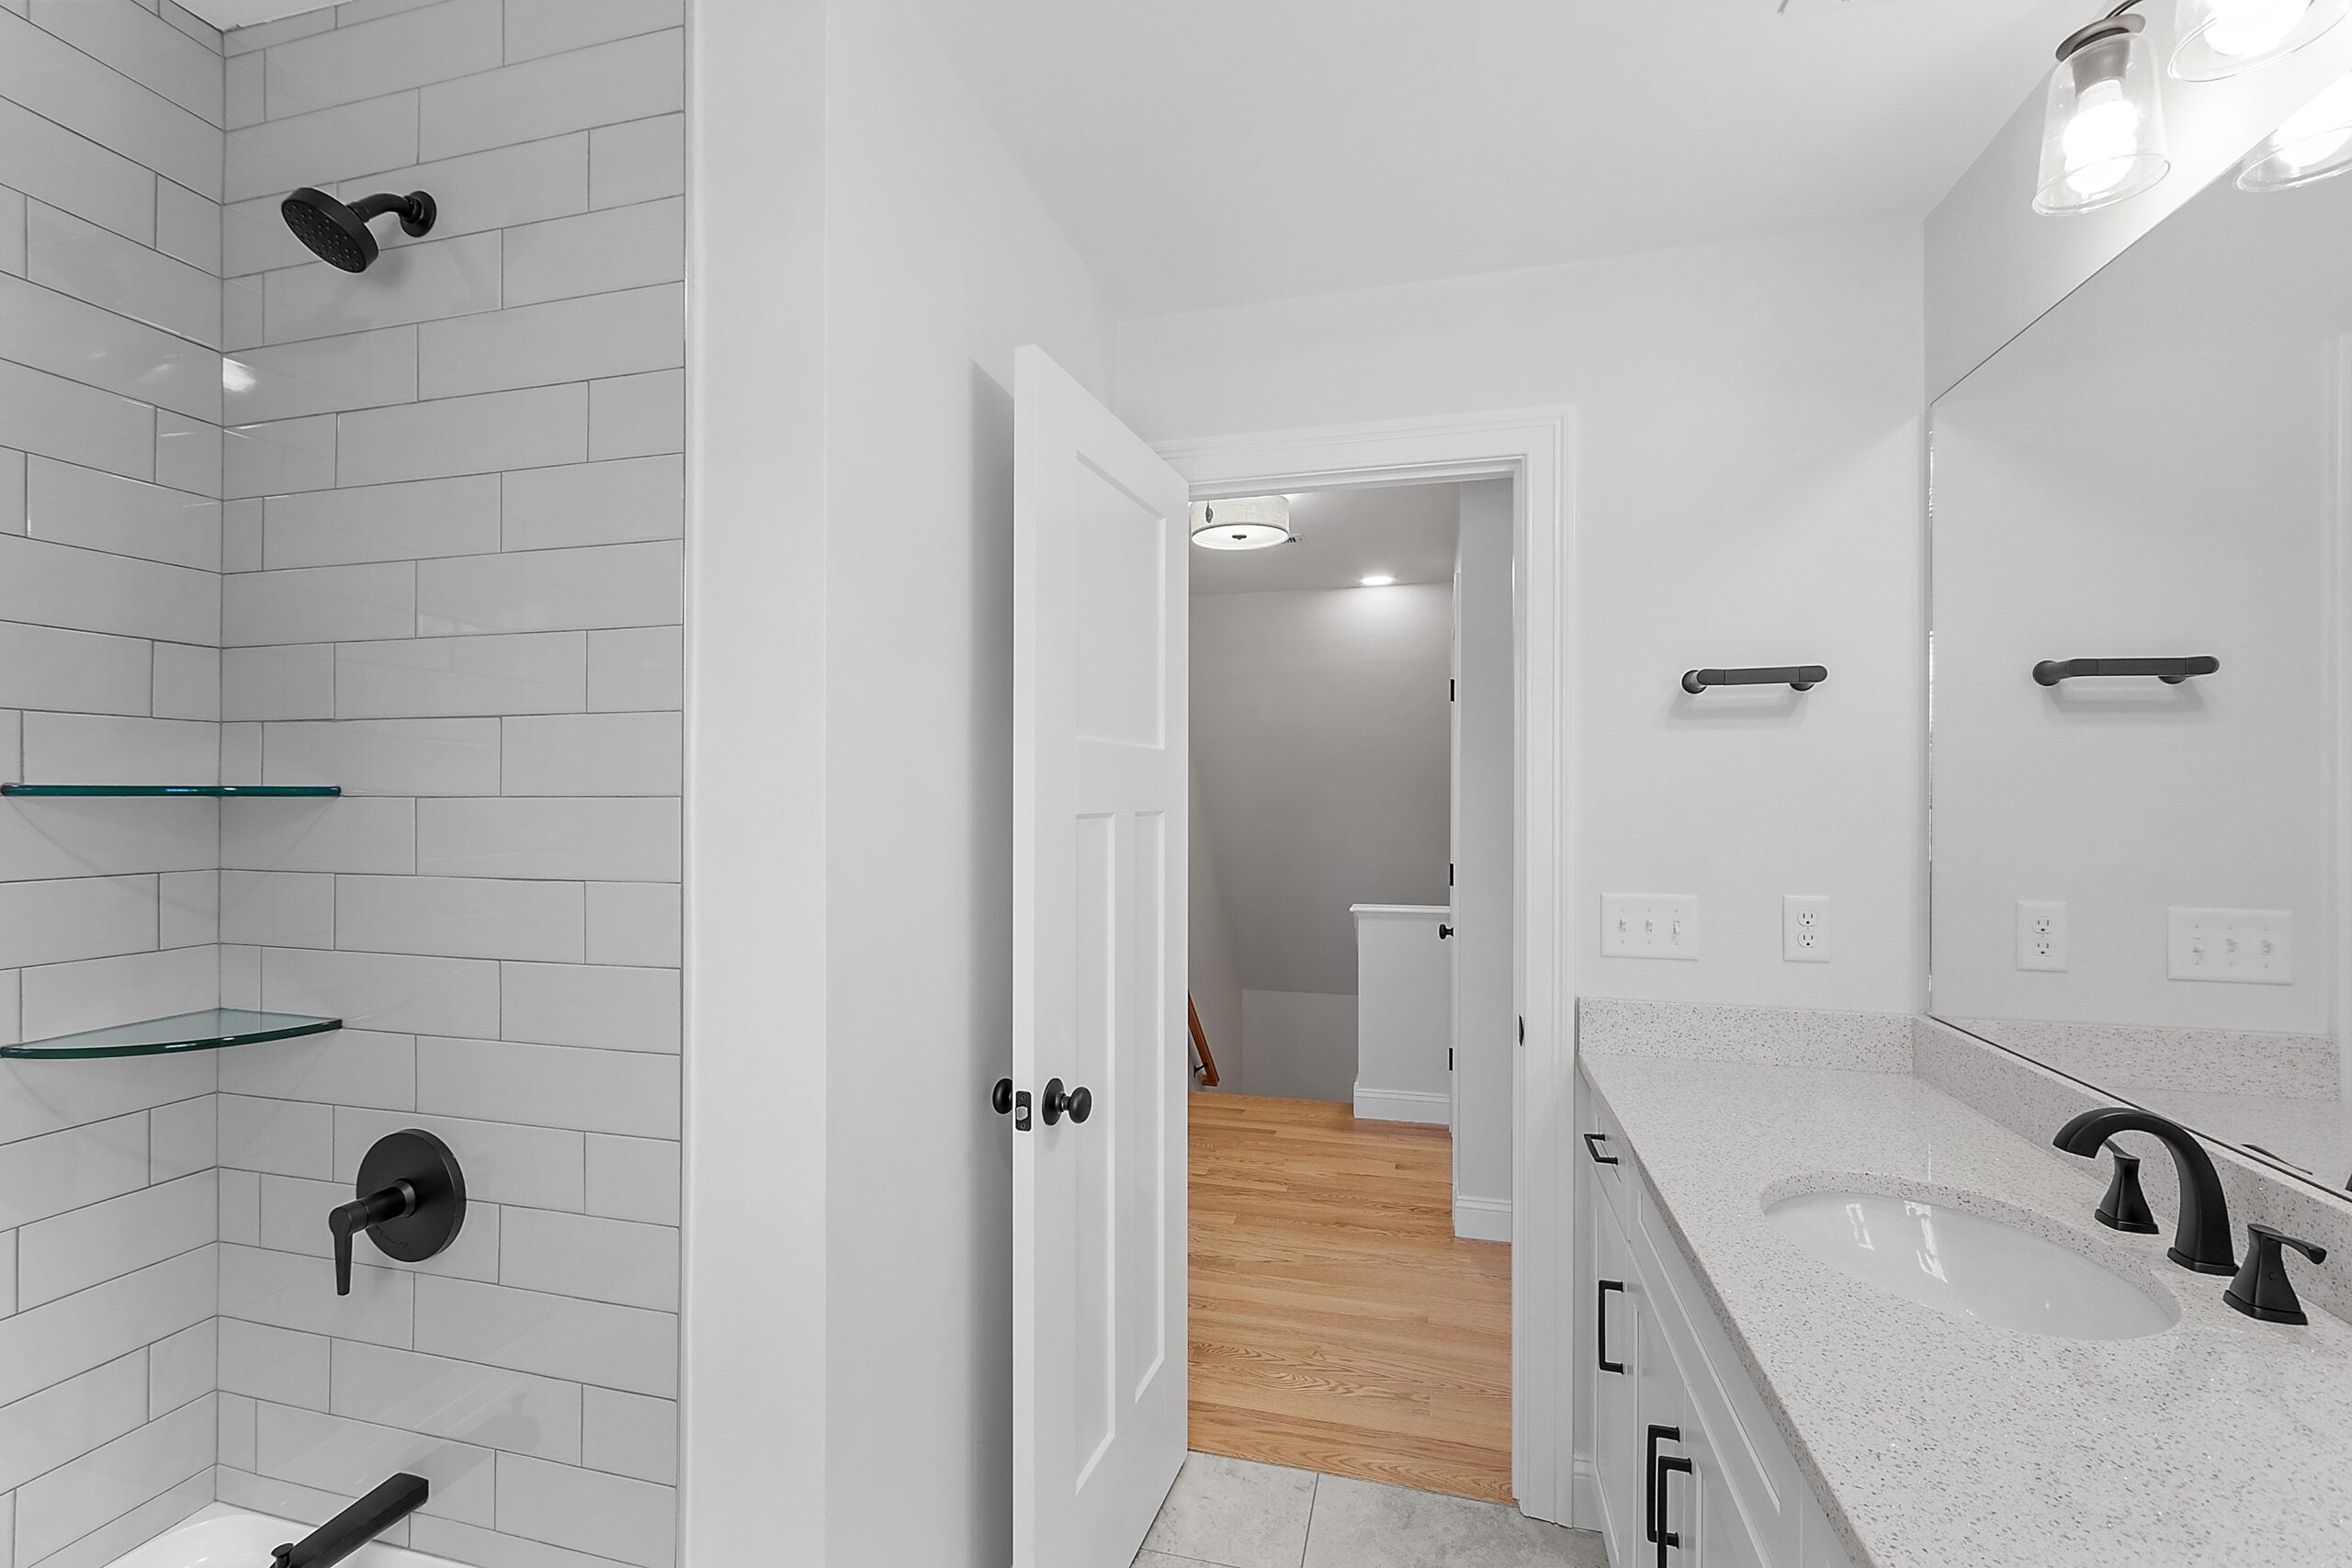 a bathroom with white cabinetry, white walls, white countertops, and a tub/shower combination with a white subway tile surround. The fixtures and handles are black.